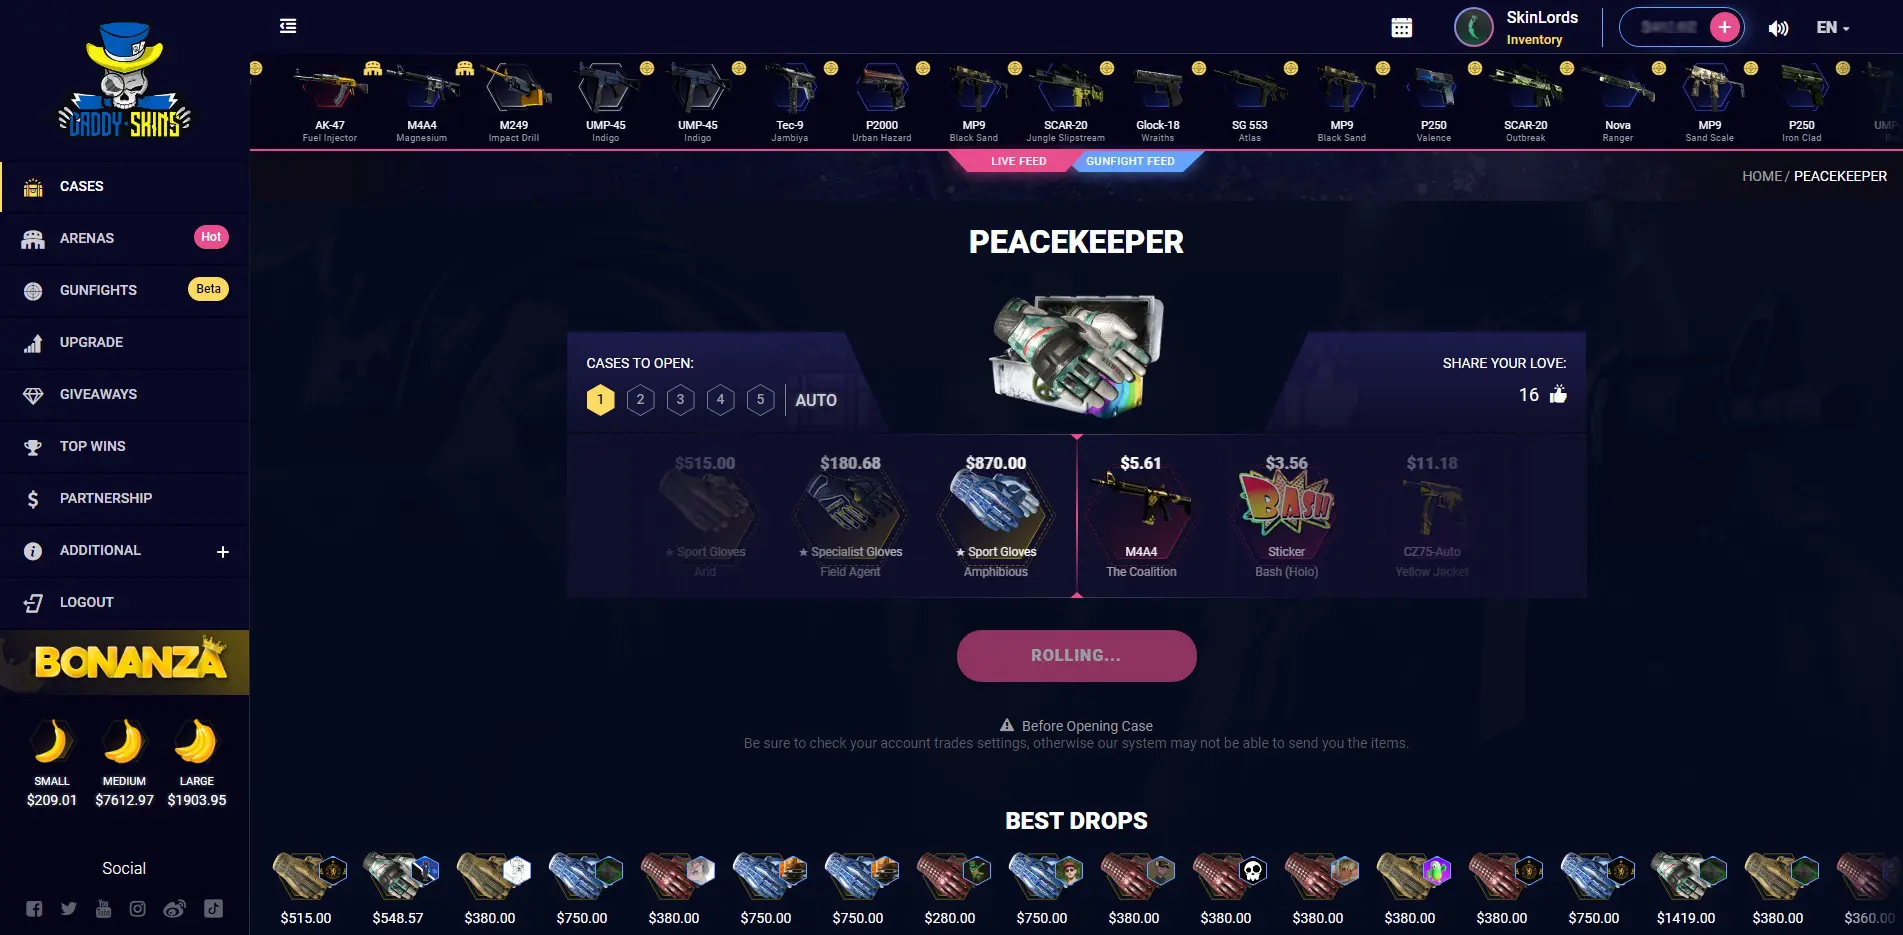 DaddySkins Peacekeeper Case Unboxing